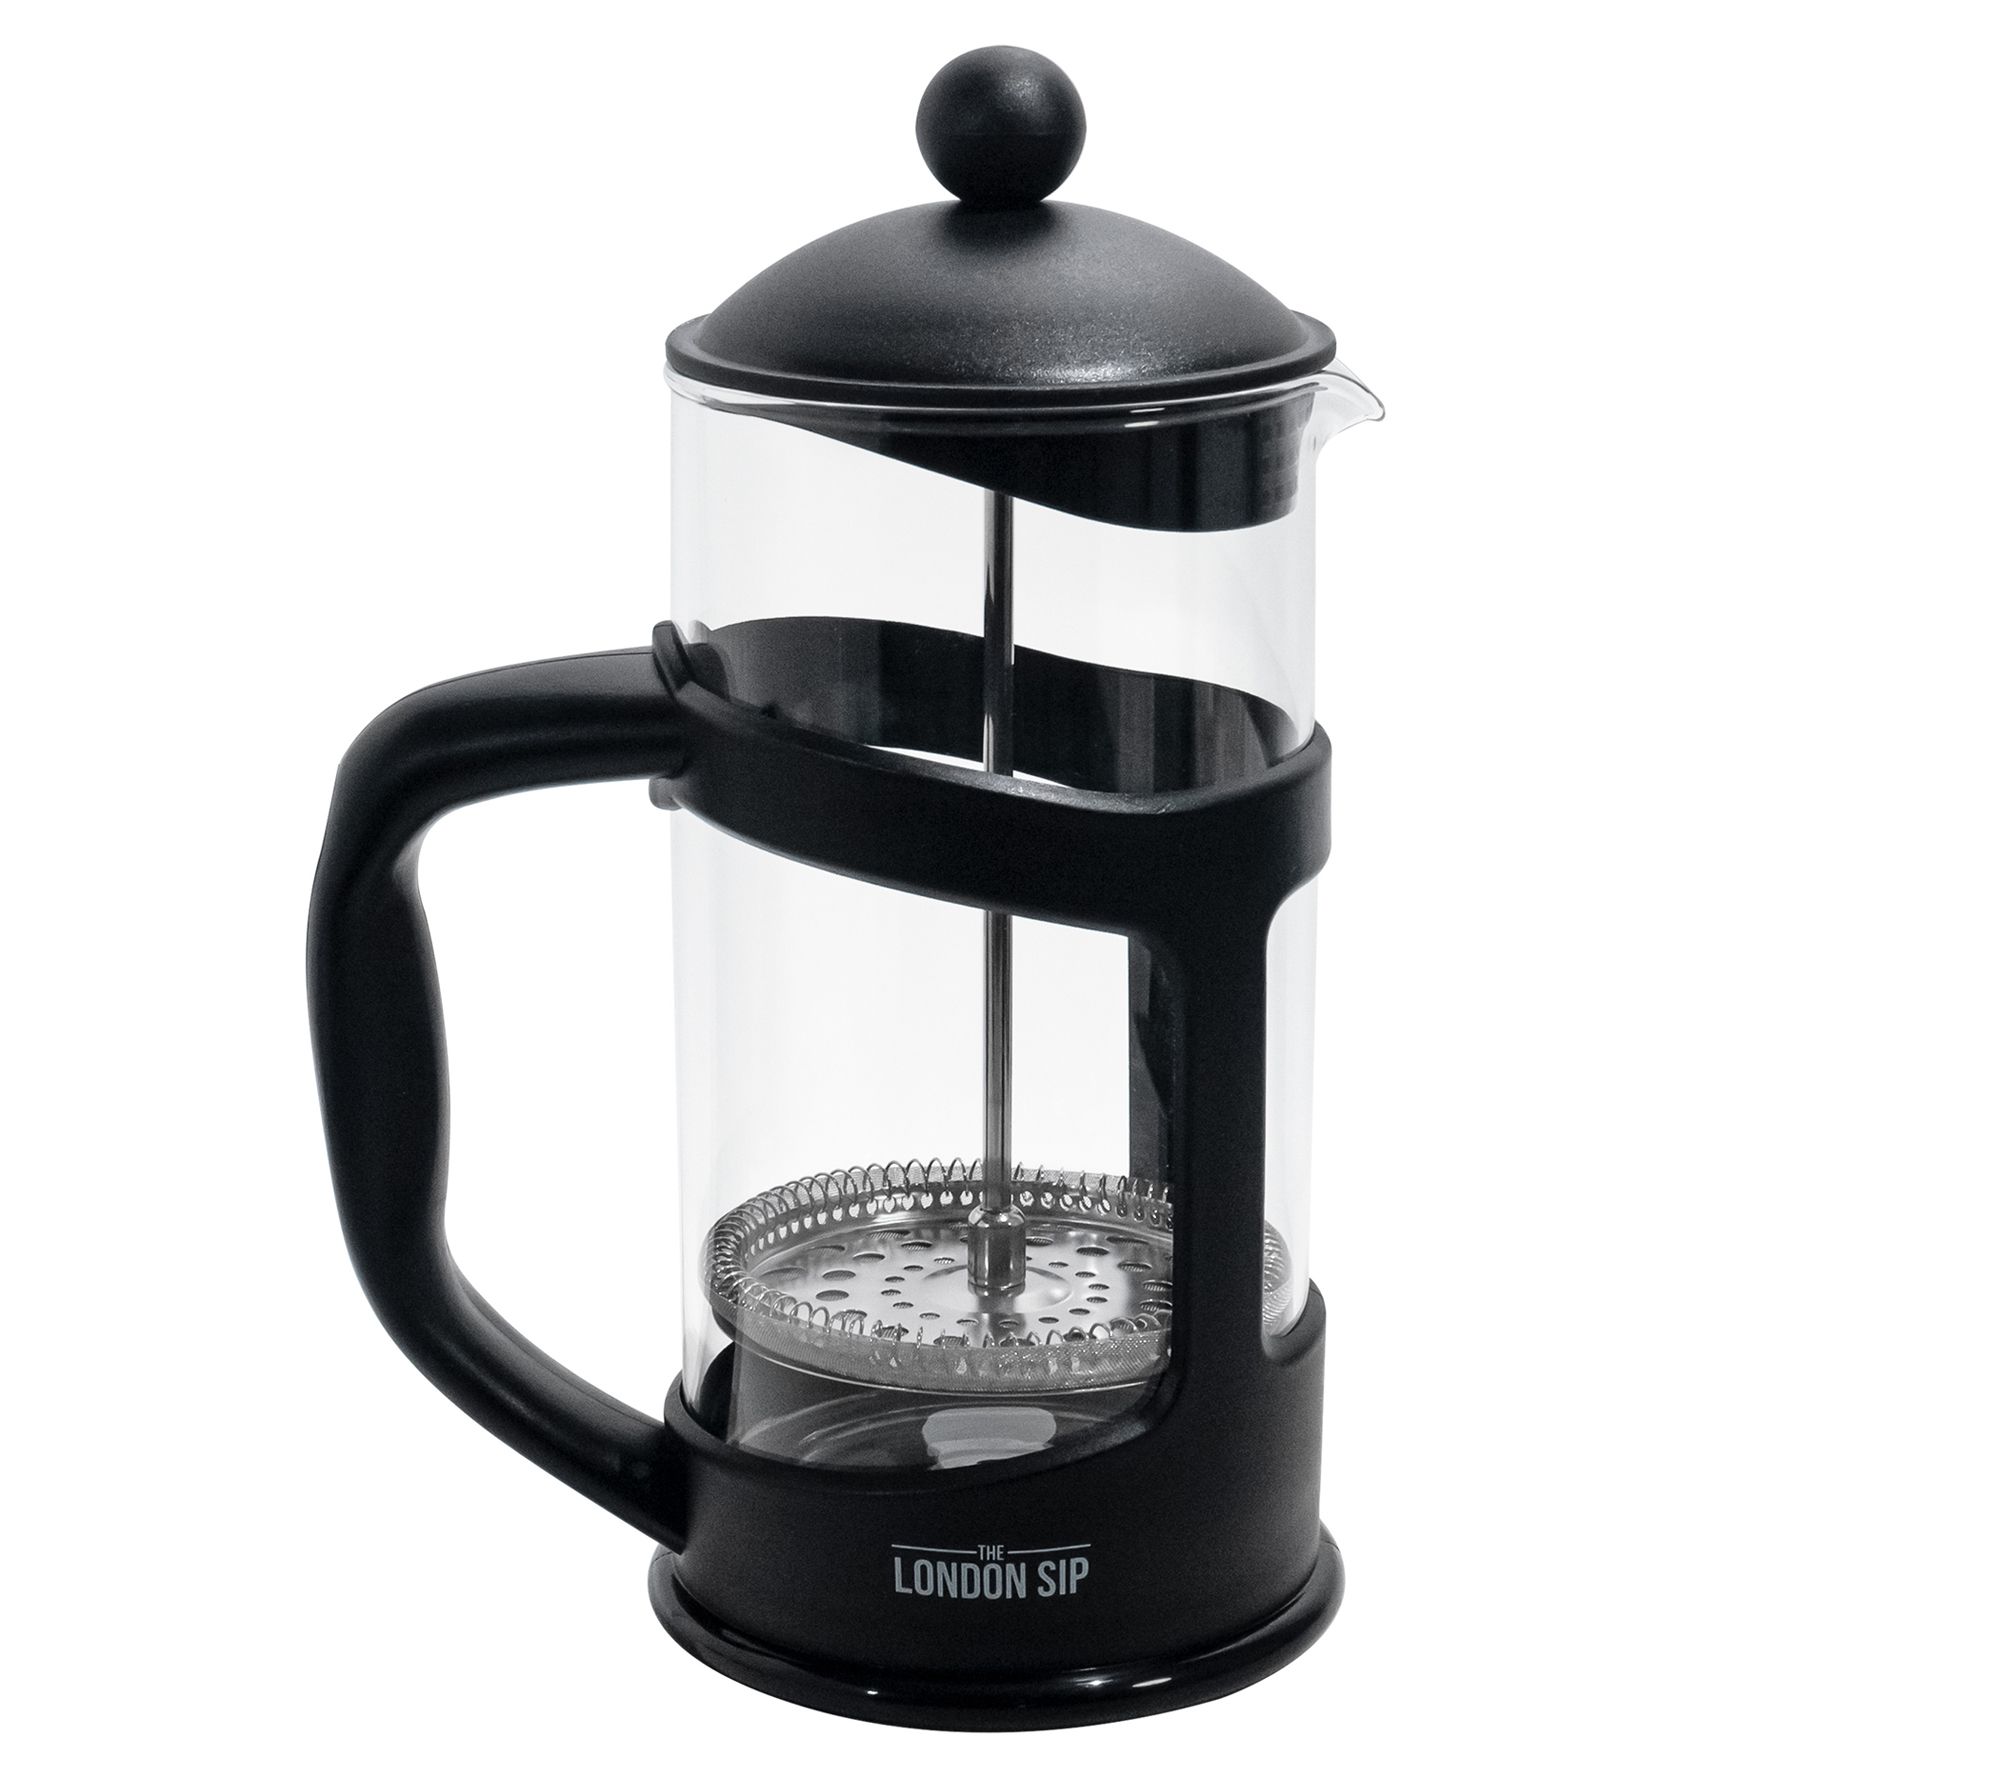 Split Decision Double Carafe 16 Cup Total Coffee Maker 